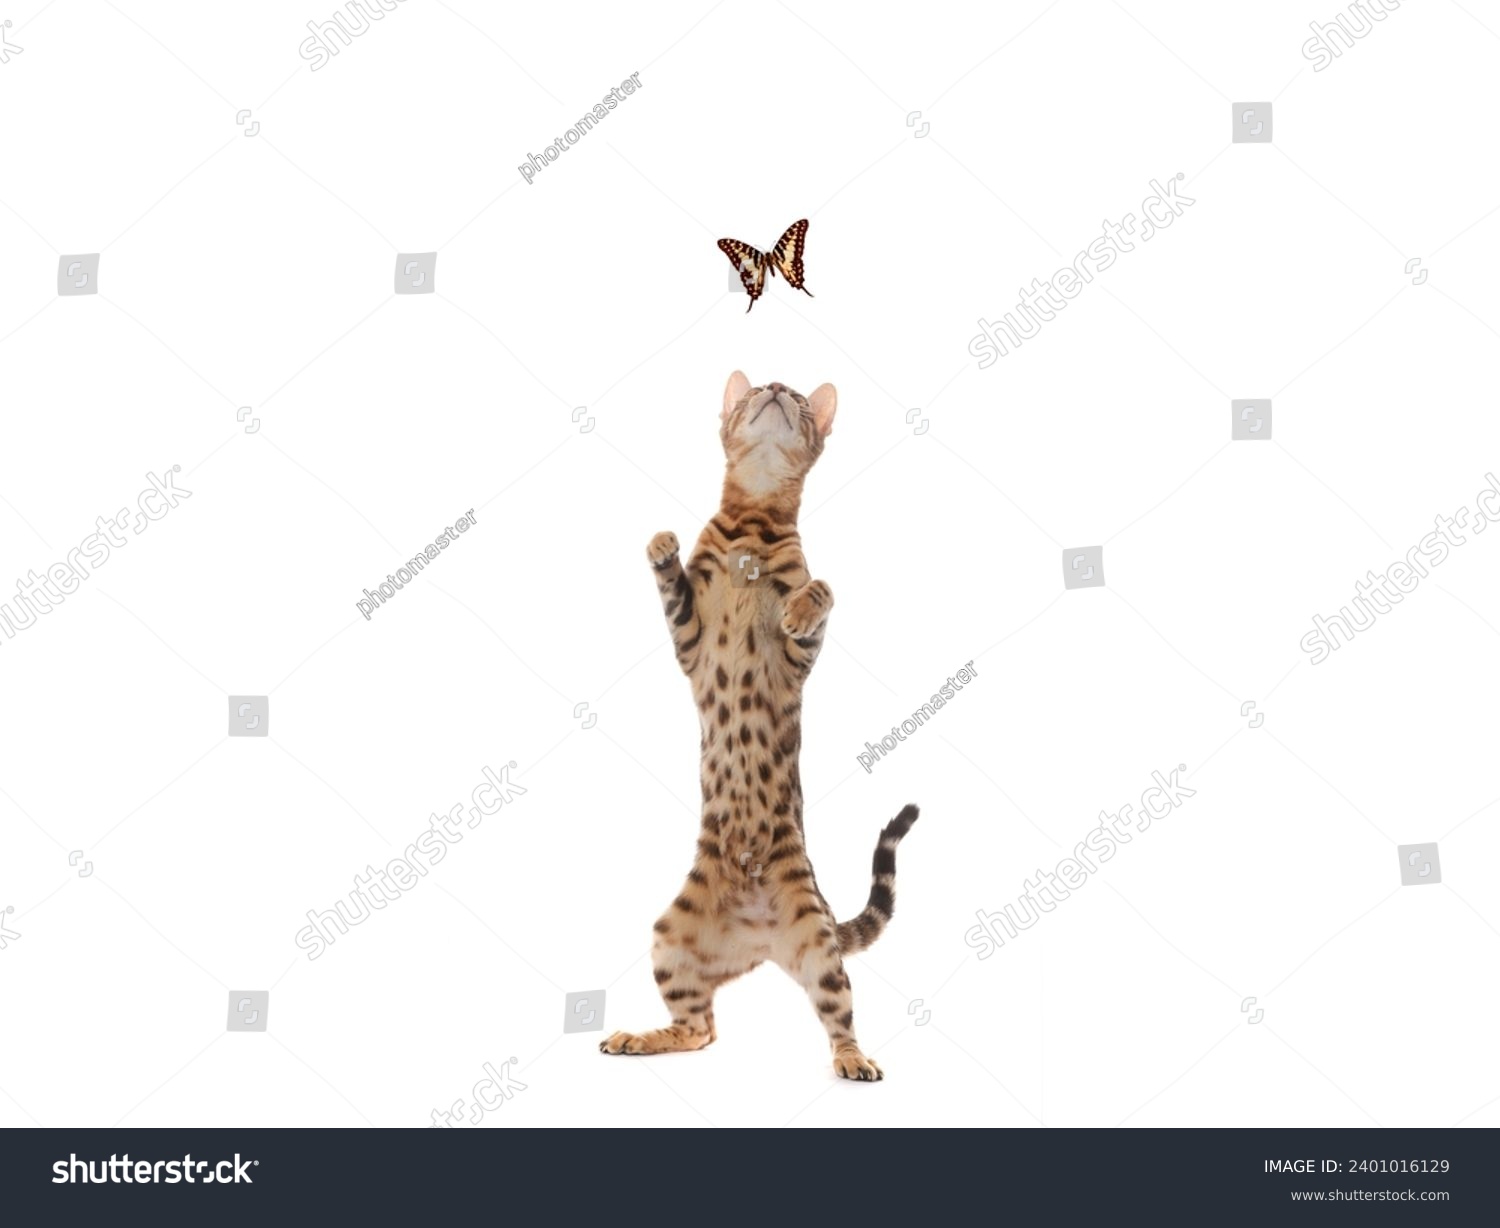 Bengal cat standing on its hind legs isolated on a white background. #2401016129